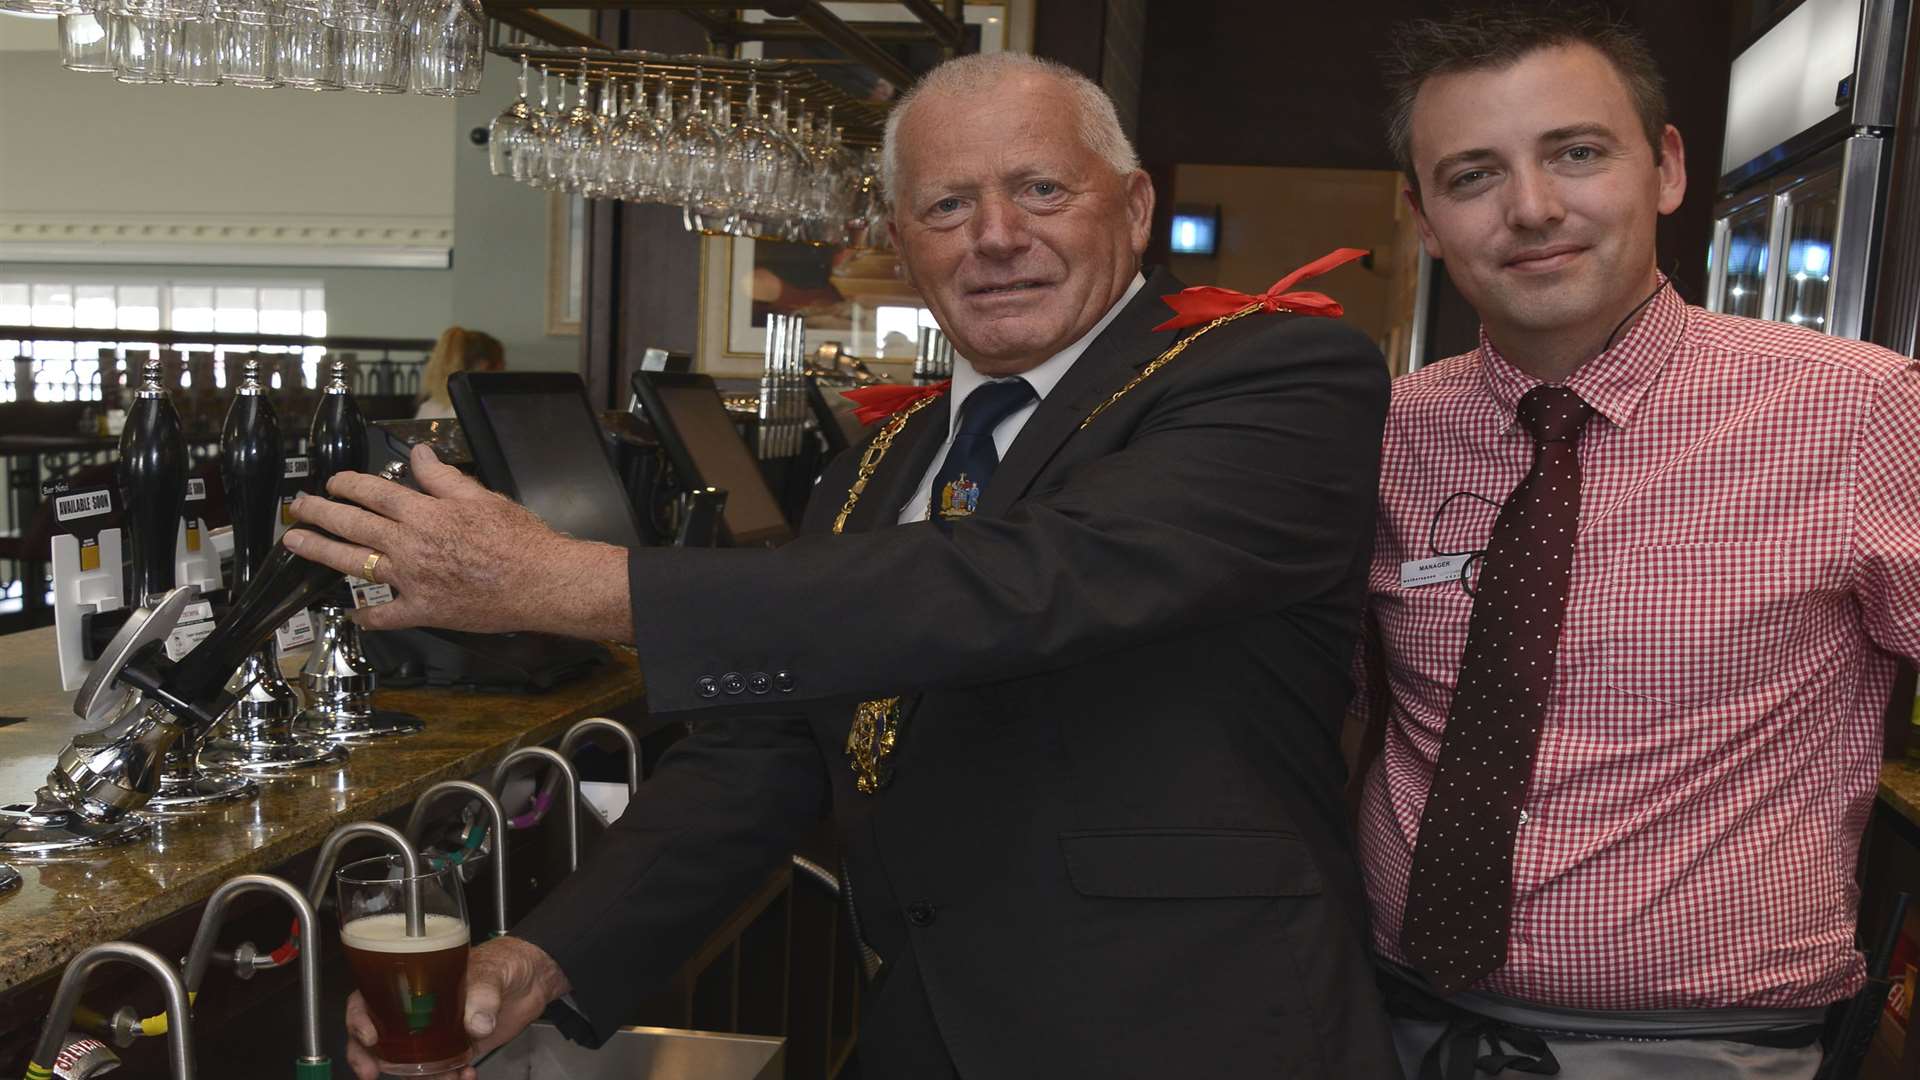 Mayor Cllr Trevor Shonk pulls a pint watched by manager Chris Whitbourn